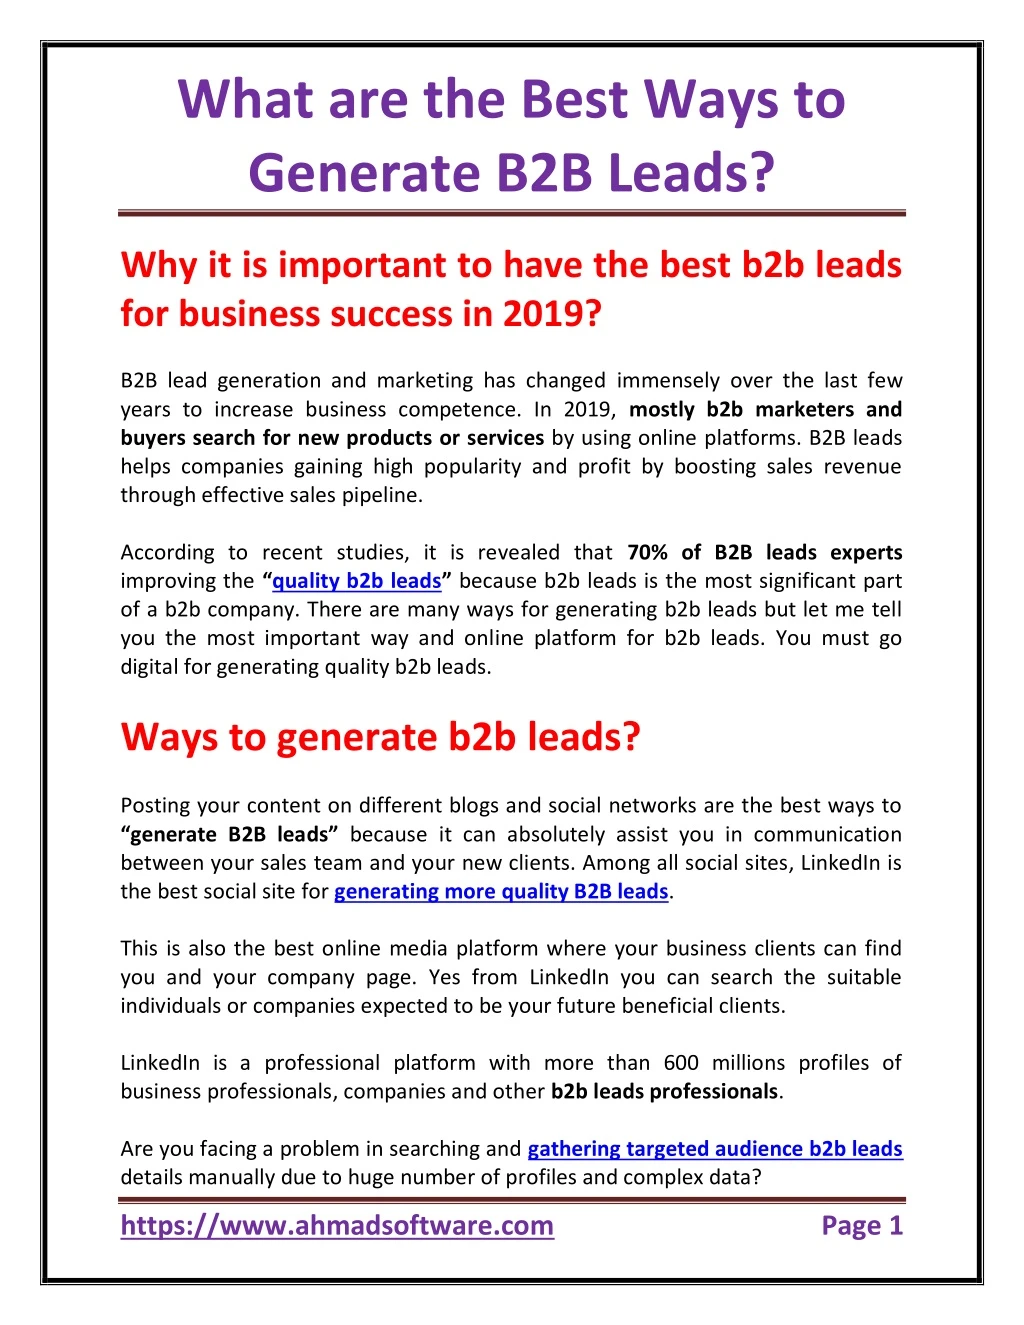 what are the best ways to generate b2b leads